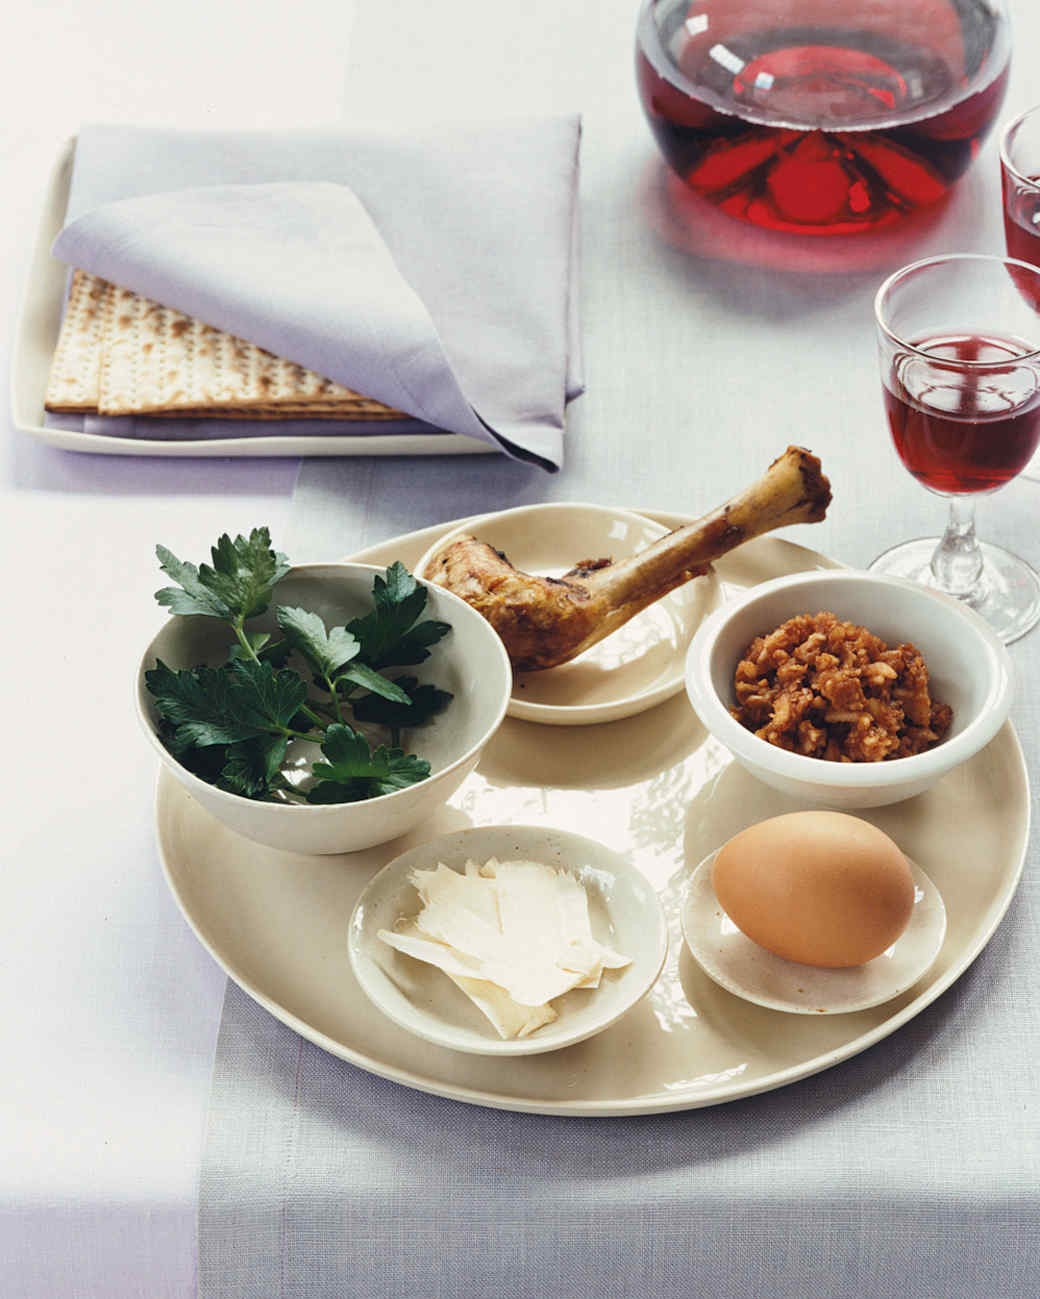 Passover Seder Ideas
 15 Passover Entertaining Ideas for the Whole Family